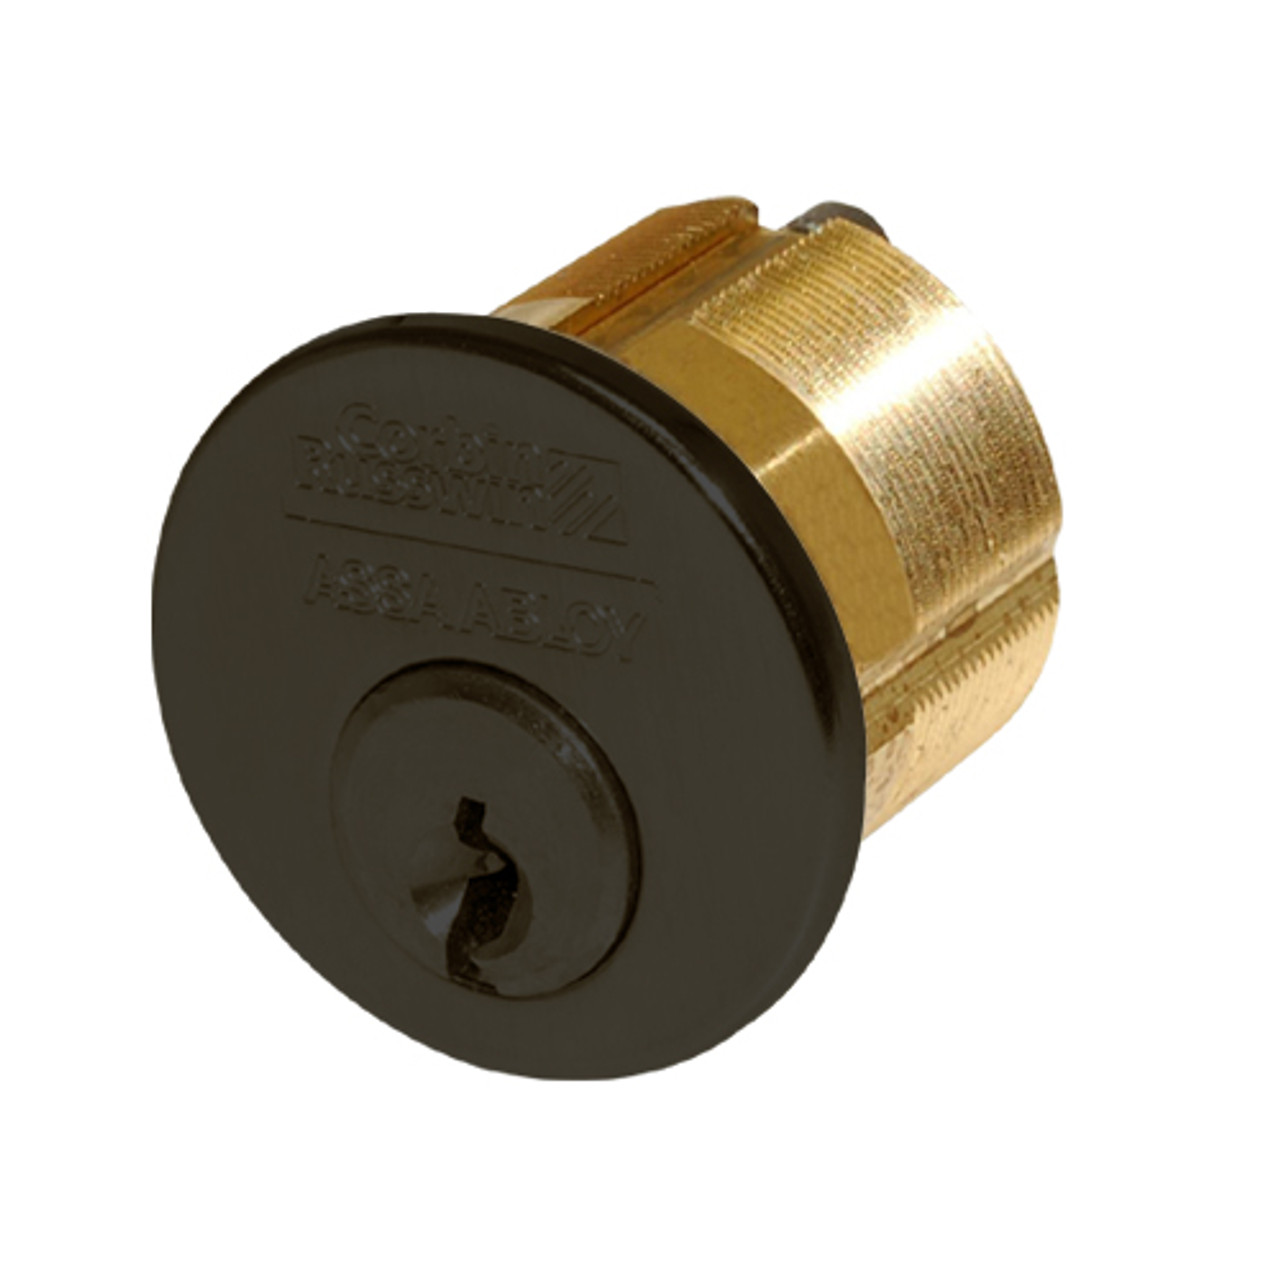 CR1000-138-A06-6-D3-613 Corbin Conventional Mortise Cylinder for Mortise Lock and DL3000 Deadlocks with Schlage L9000 Cam in Oil Rubbed Bronze Finish